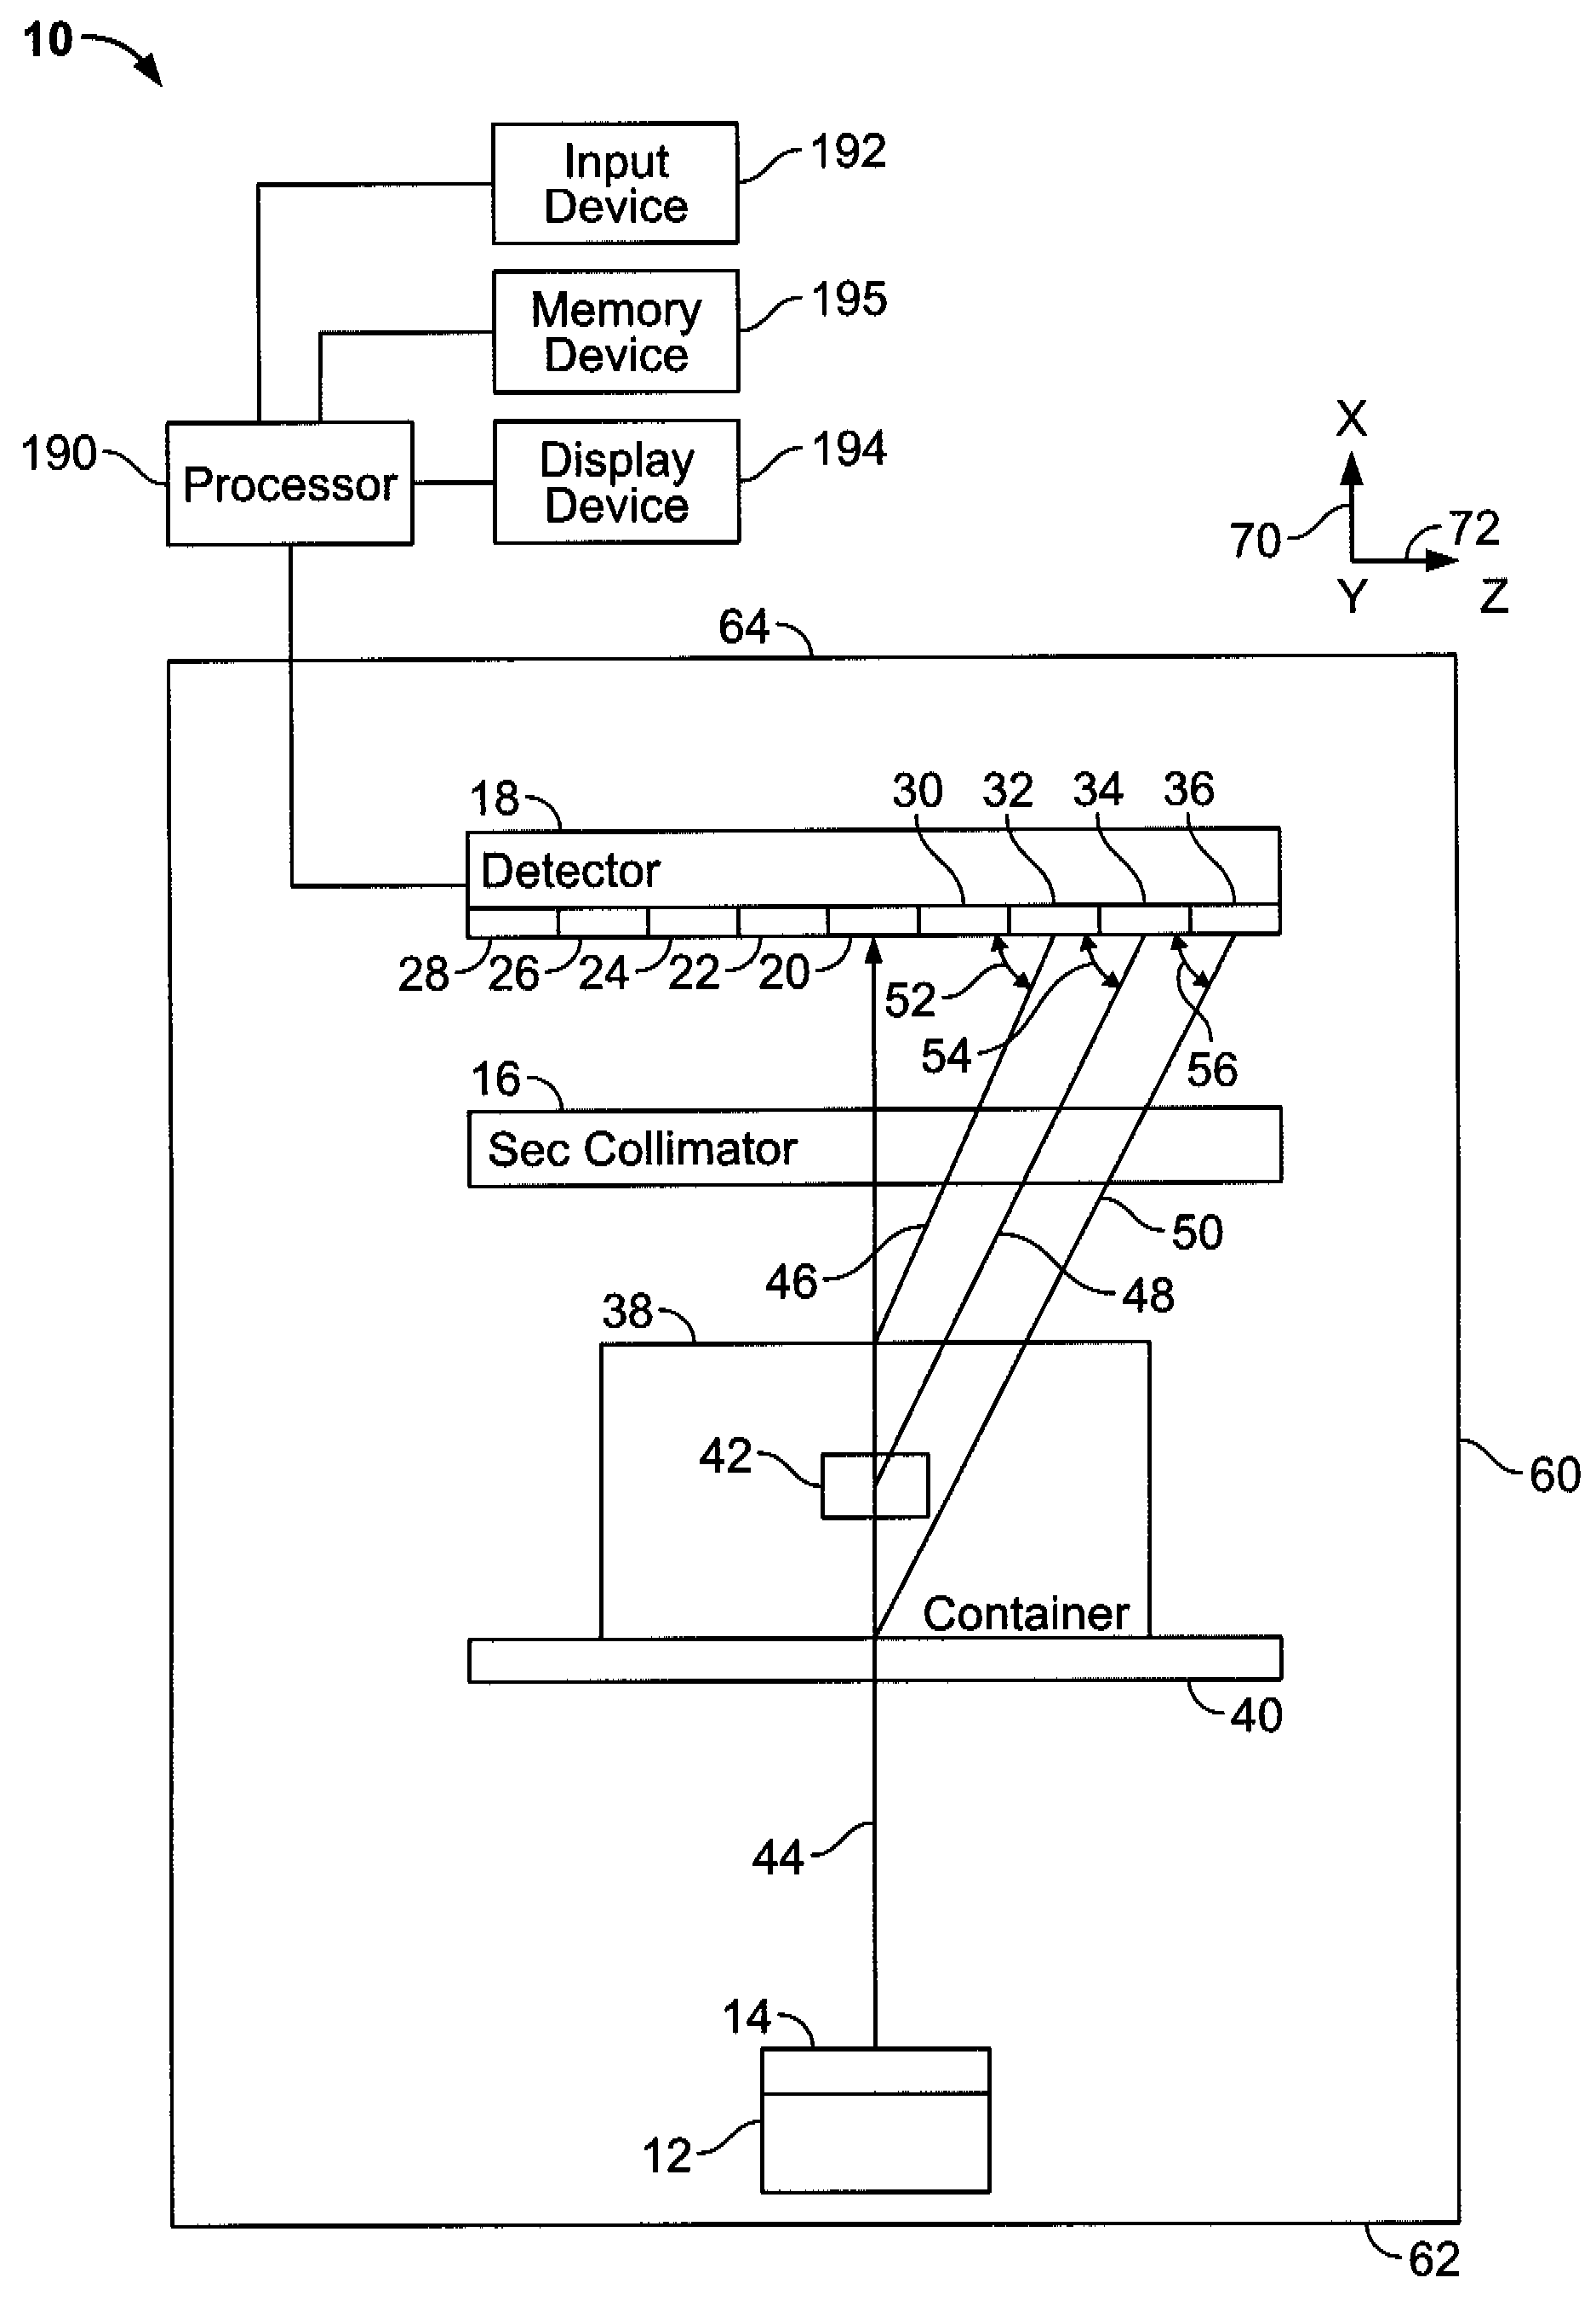 Method for developing an x-ray diffraction imaging system